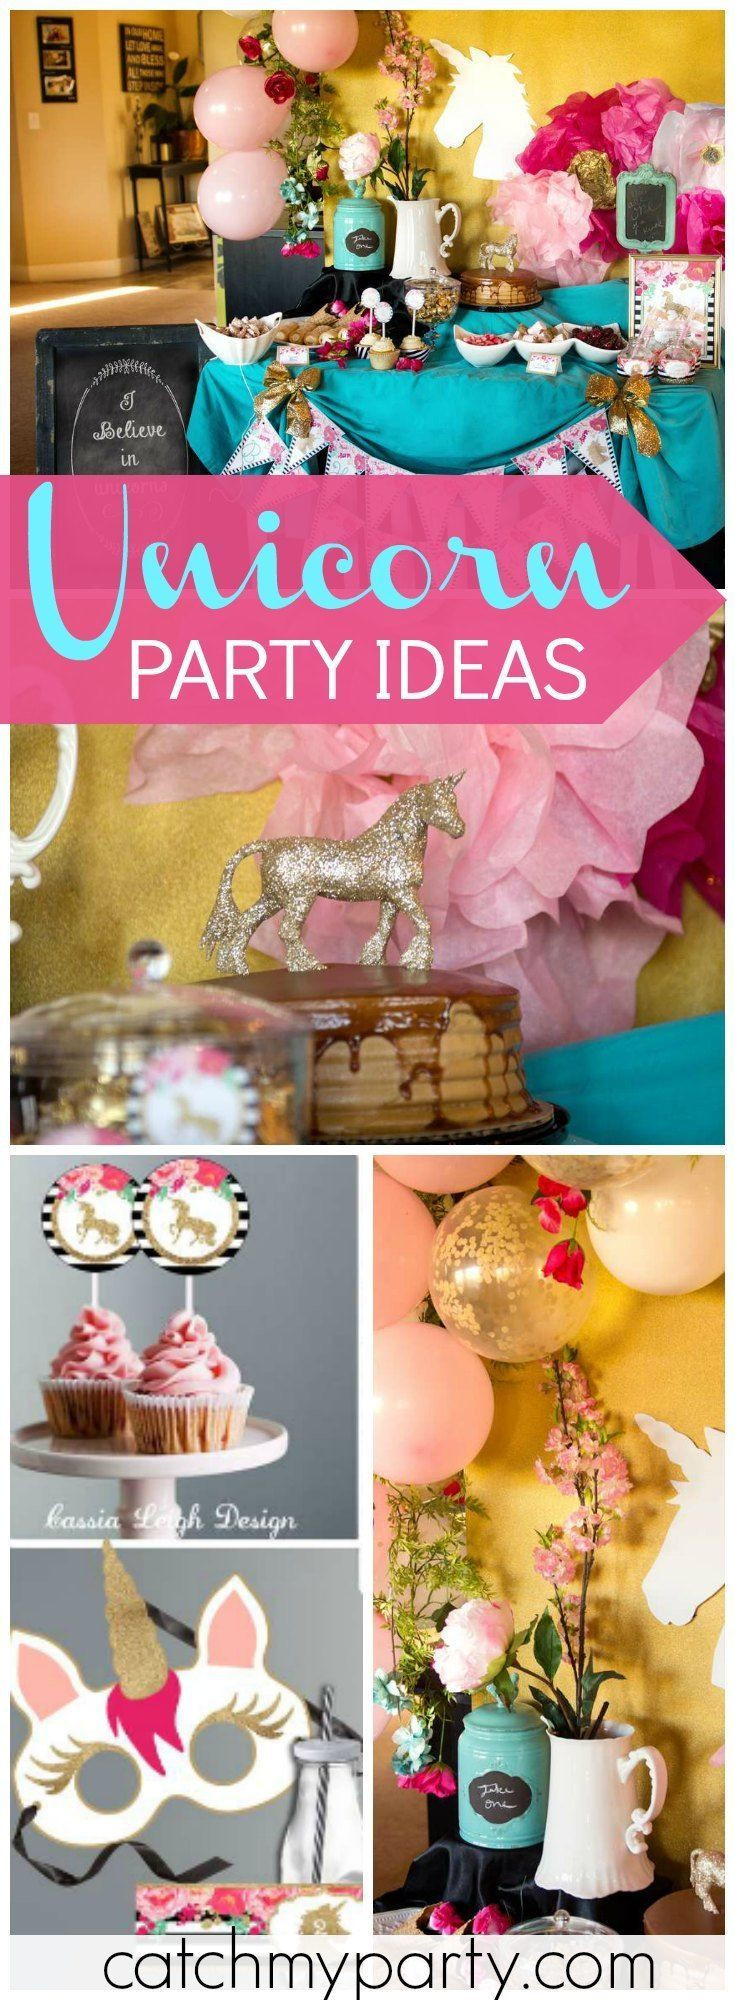 Unicorn Party Game Ideas
 676 best images about Party Ideas on Pinterest